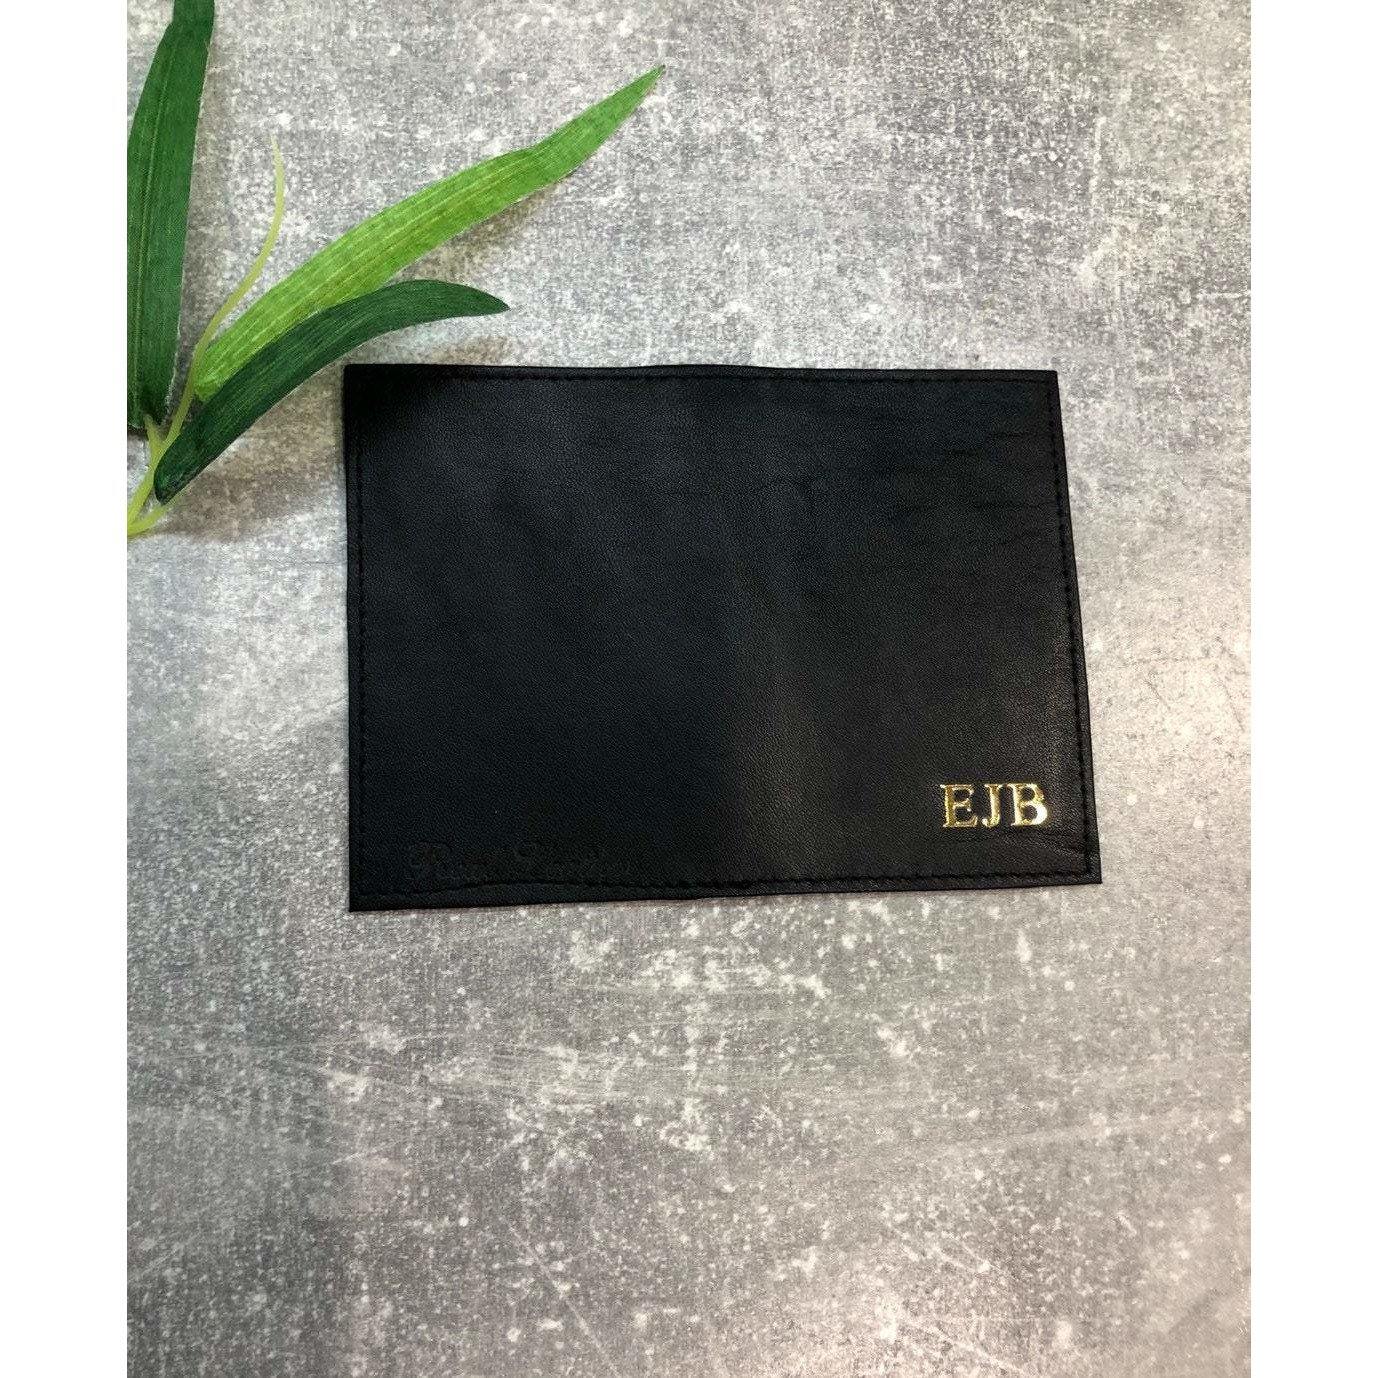 Leather travel card holder personalised with your name or initials | Travel wallet | Card holder - PersonalisebyLisa